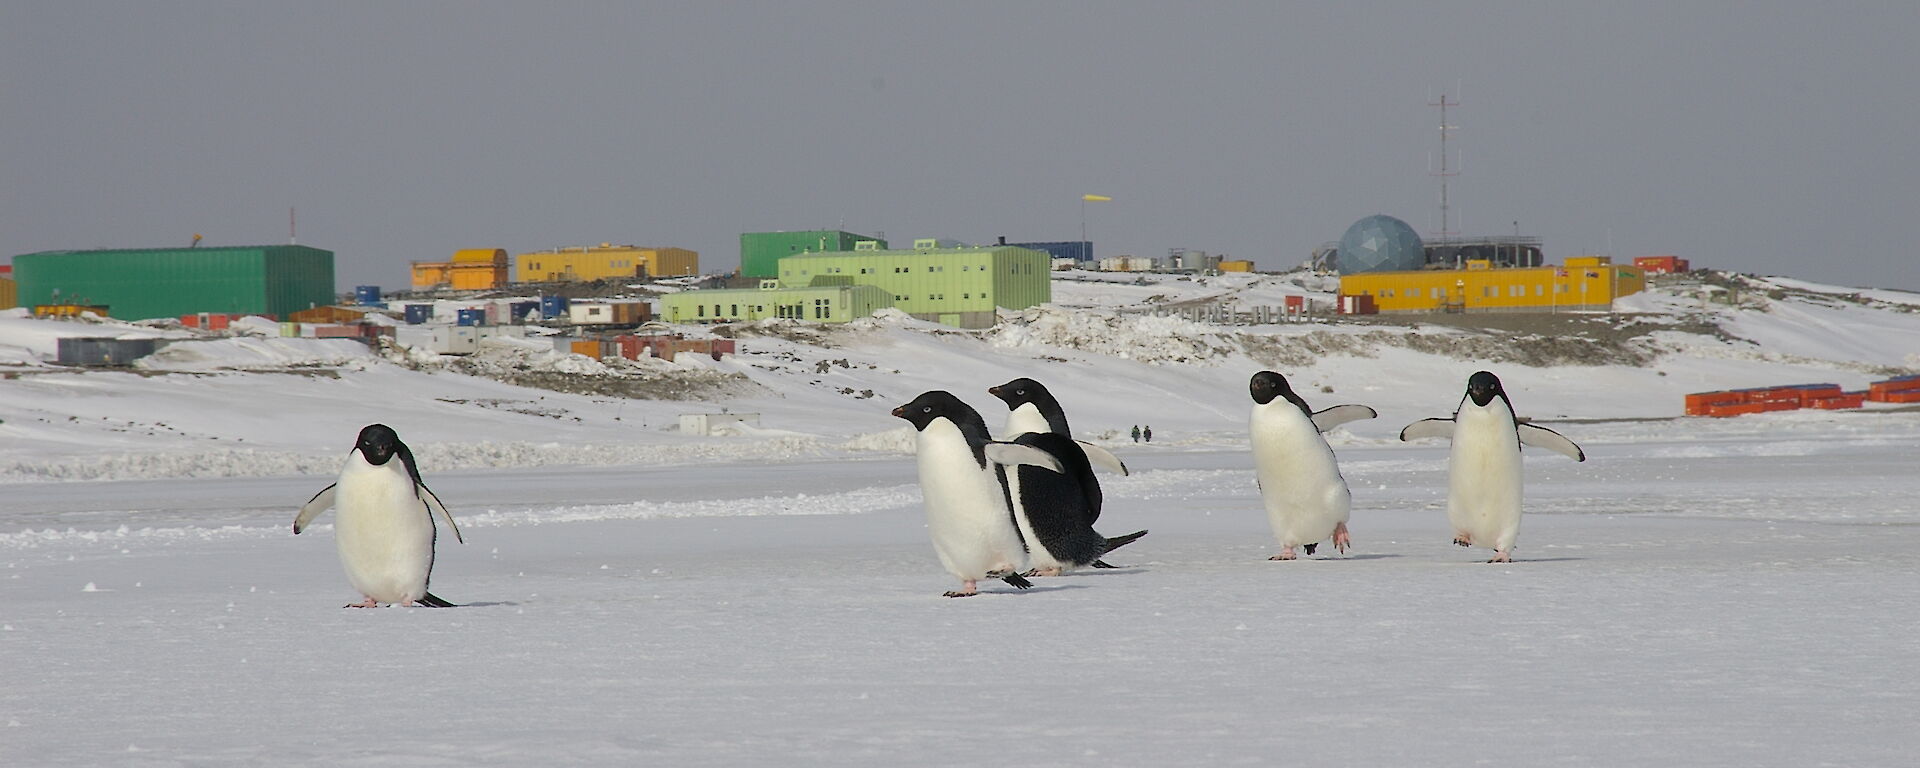 Penguins in front of station buildings